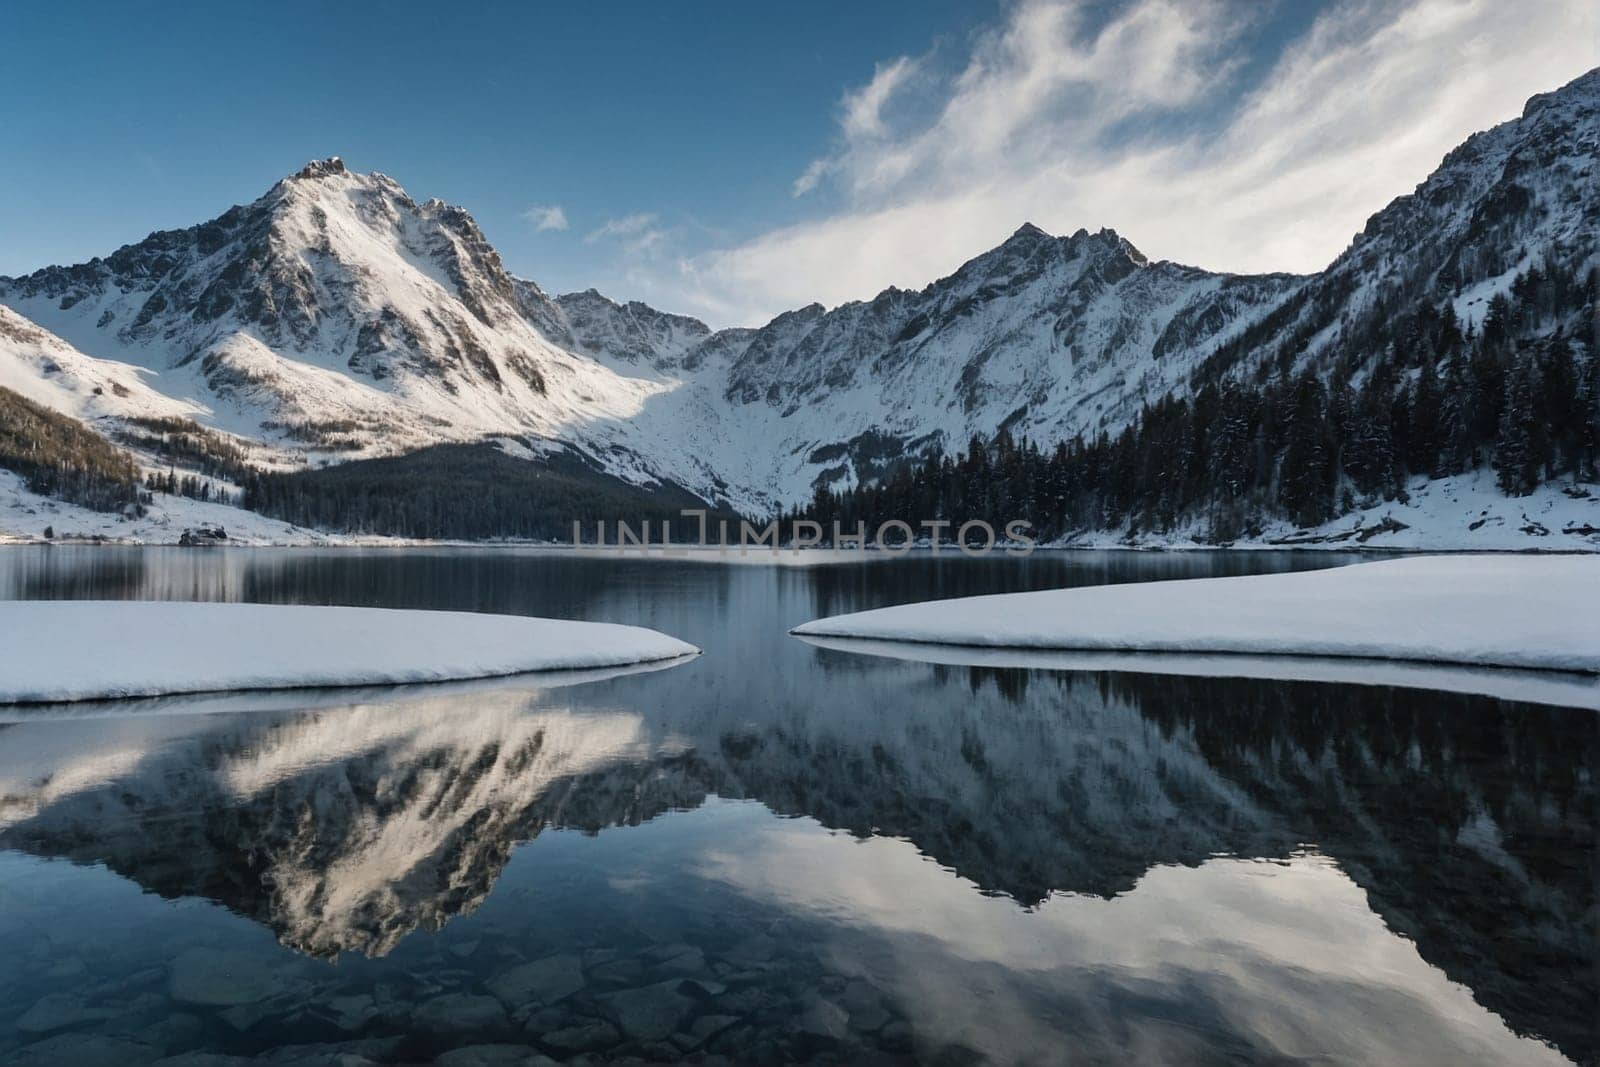 A serene lake peacefully nestled within a majestic landscape of snow-covered mountains.